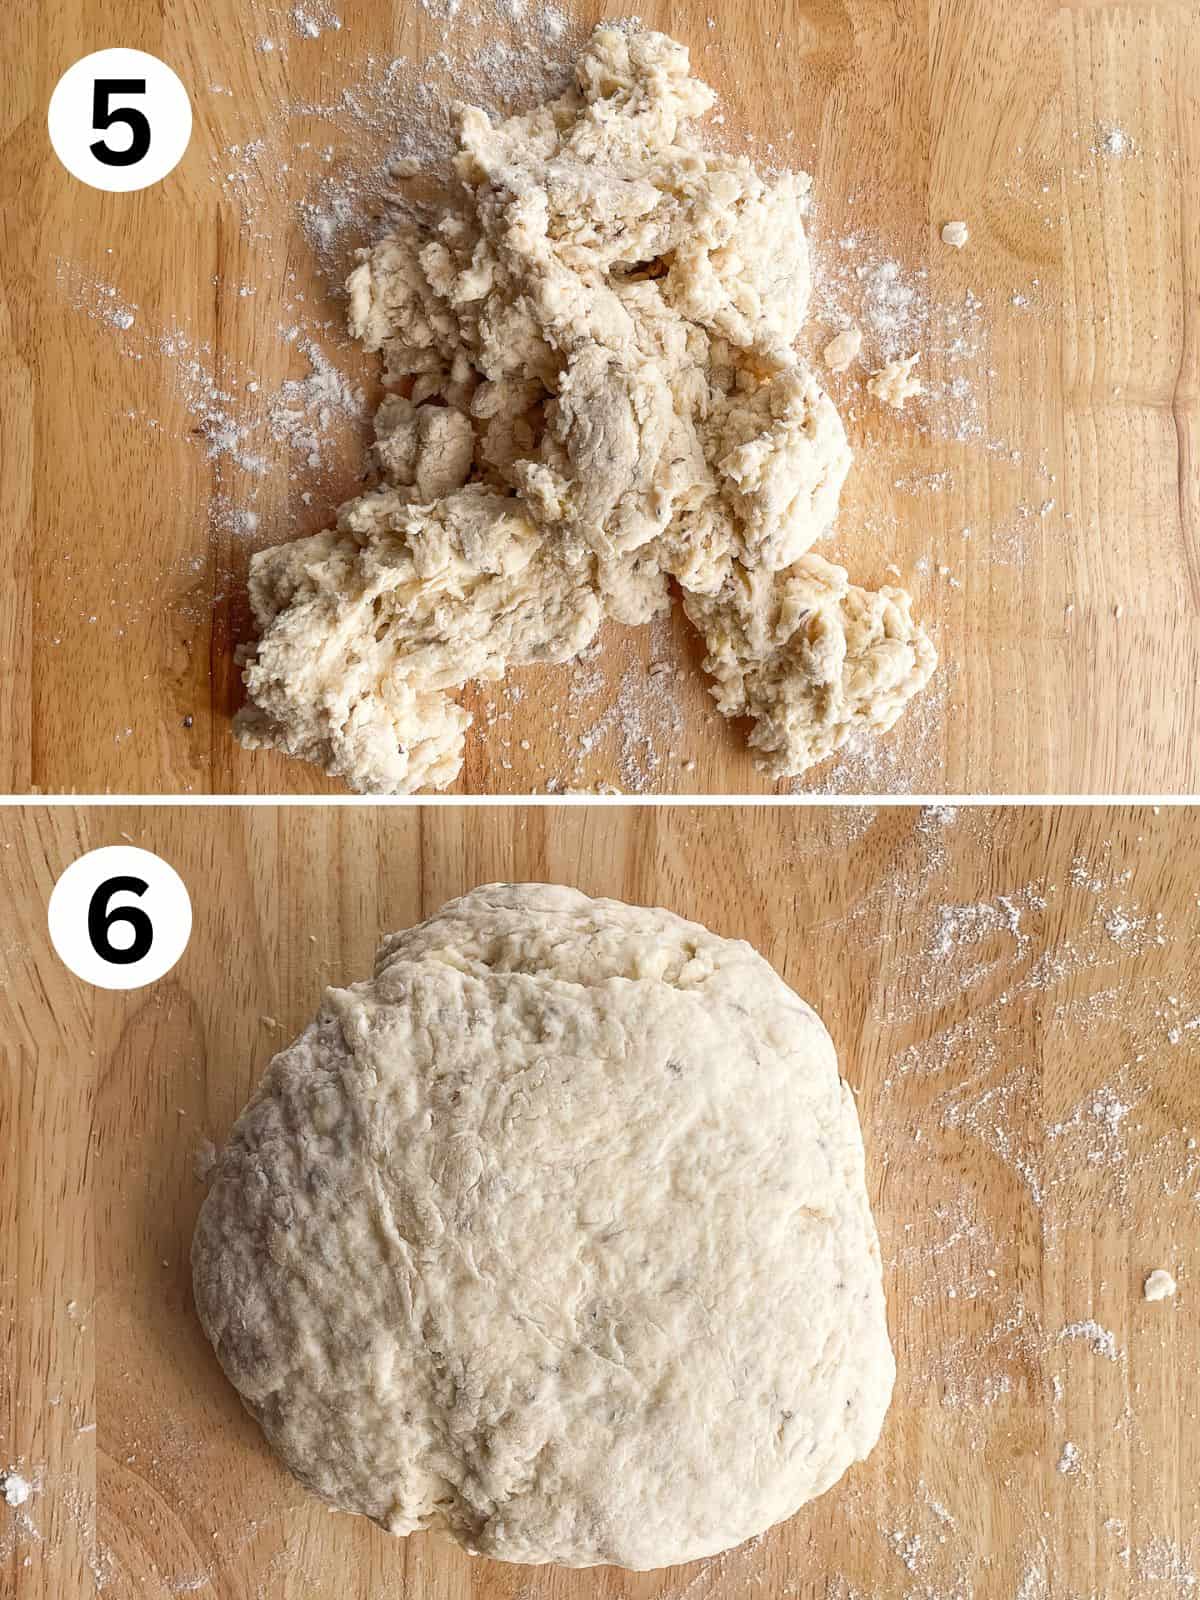 Top image: Caraway Irish soda bread dough on counter. Bottom image: the dough shaped into a round.